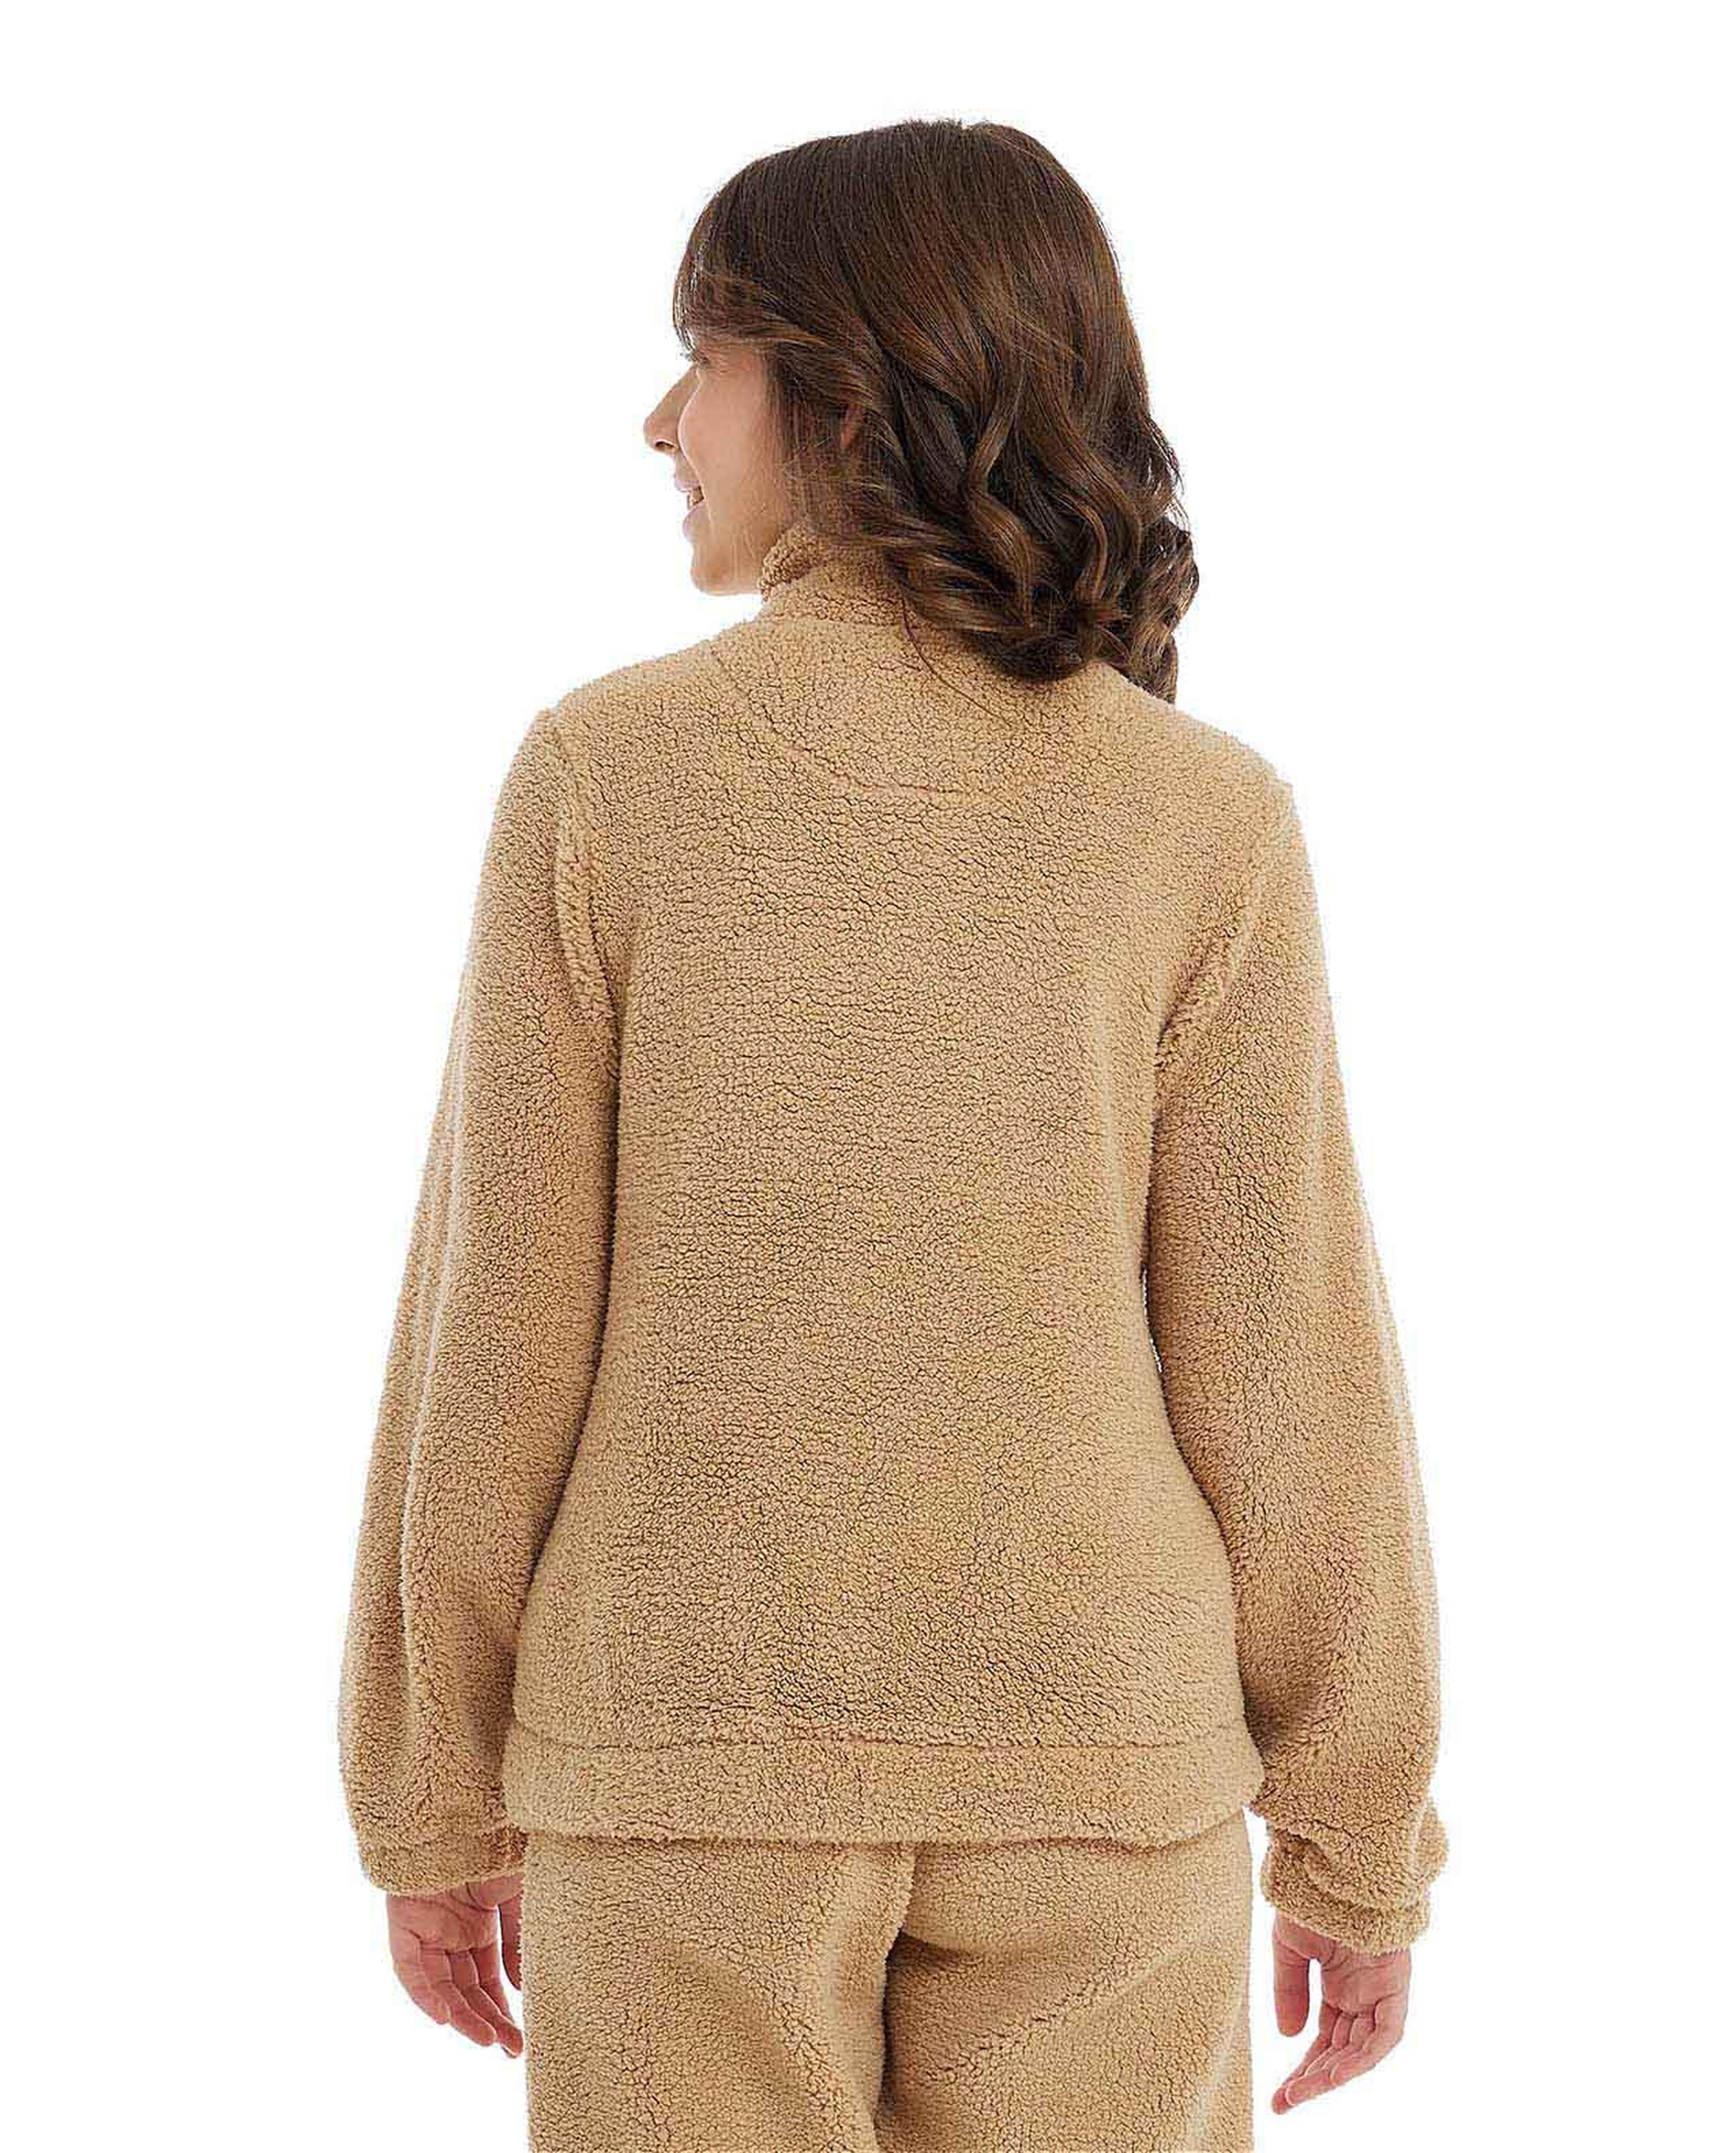 Sherpa Sweatshirt with High Neck and Long Sleeves